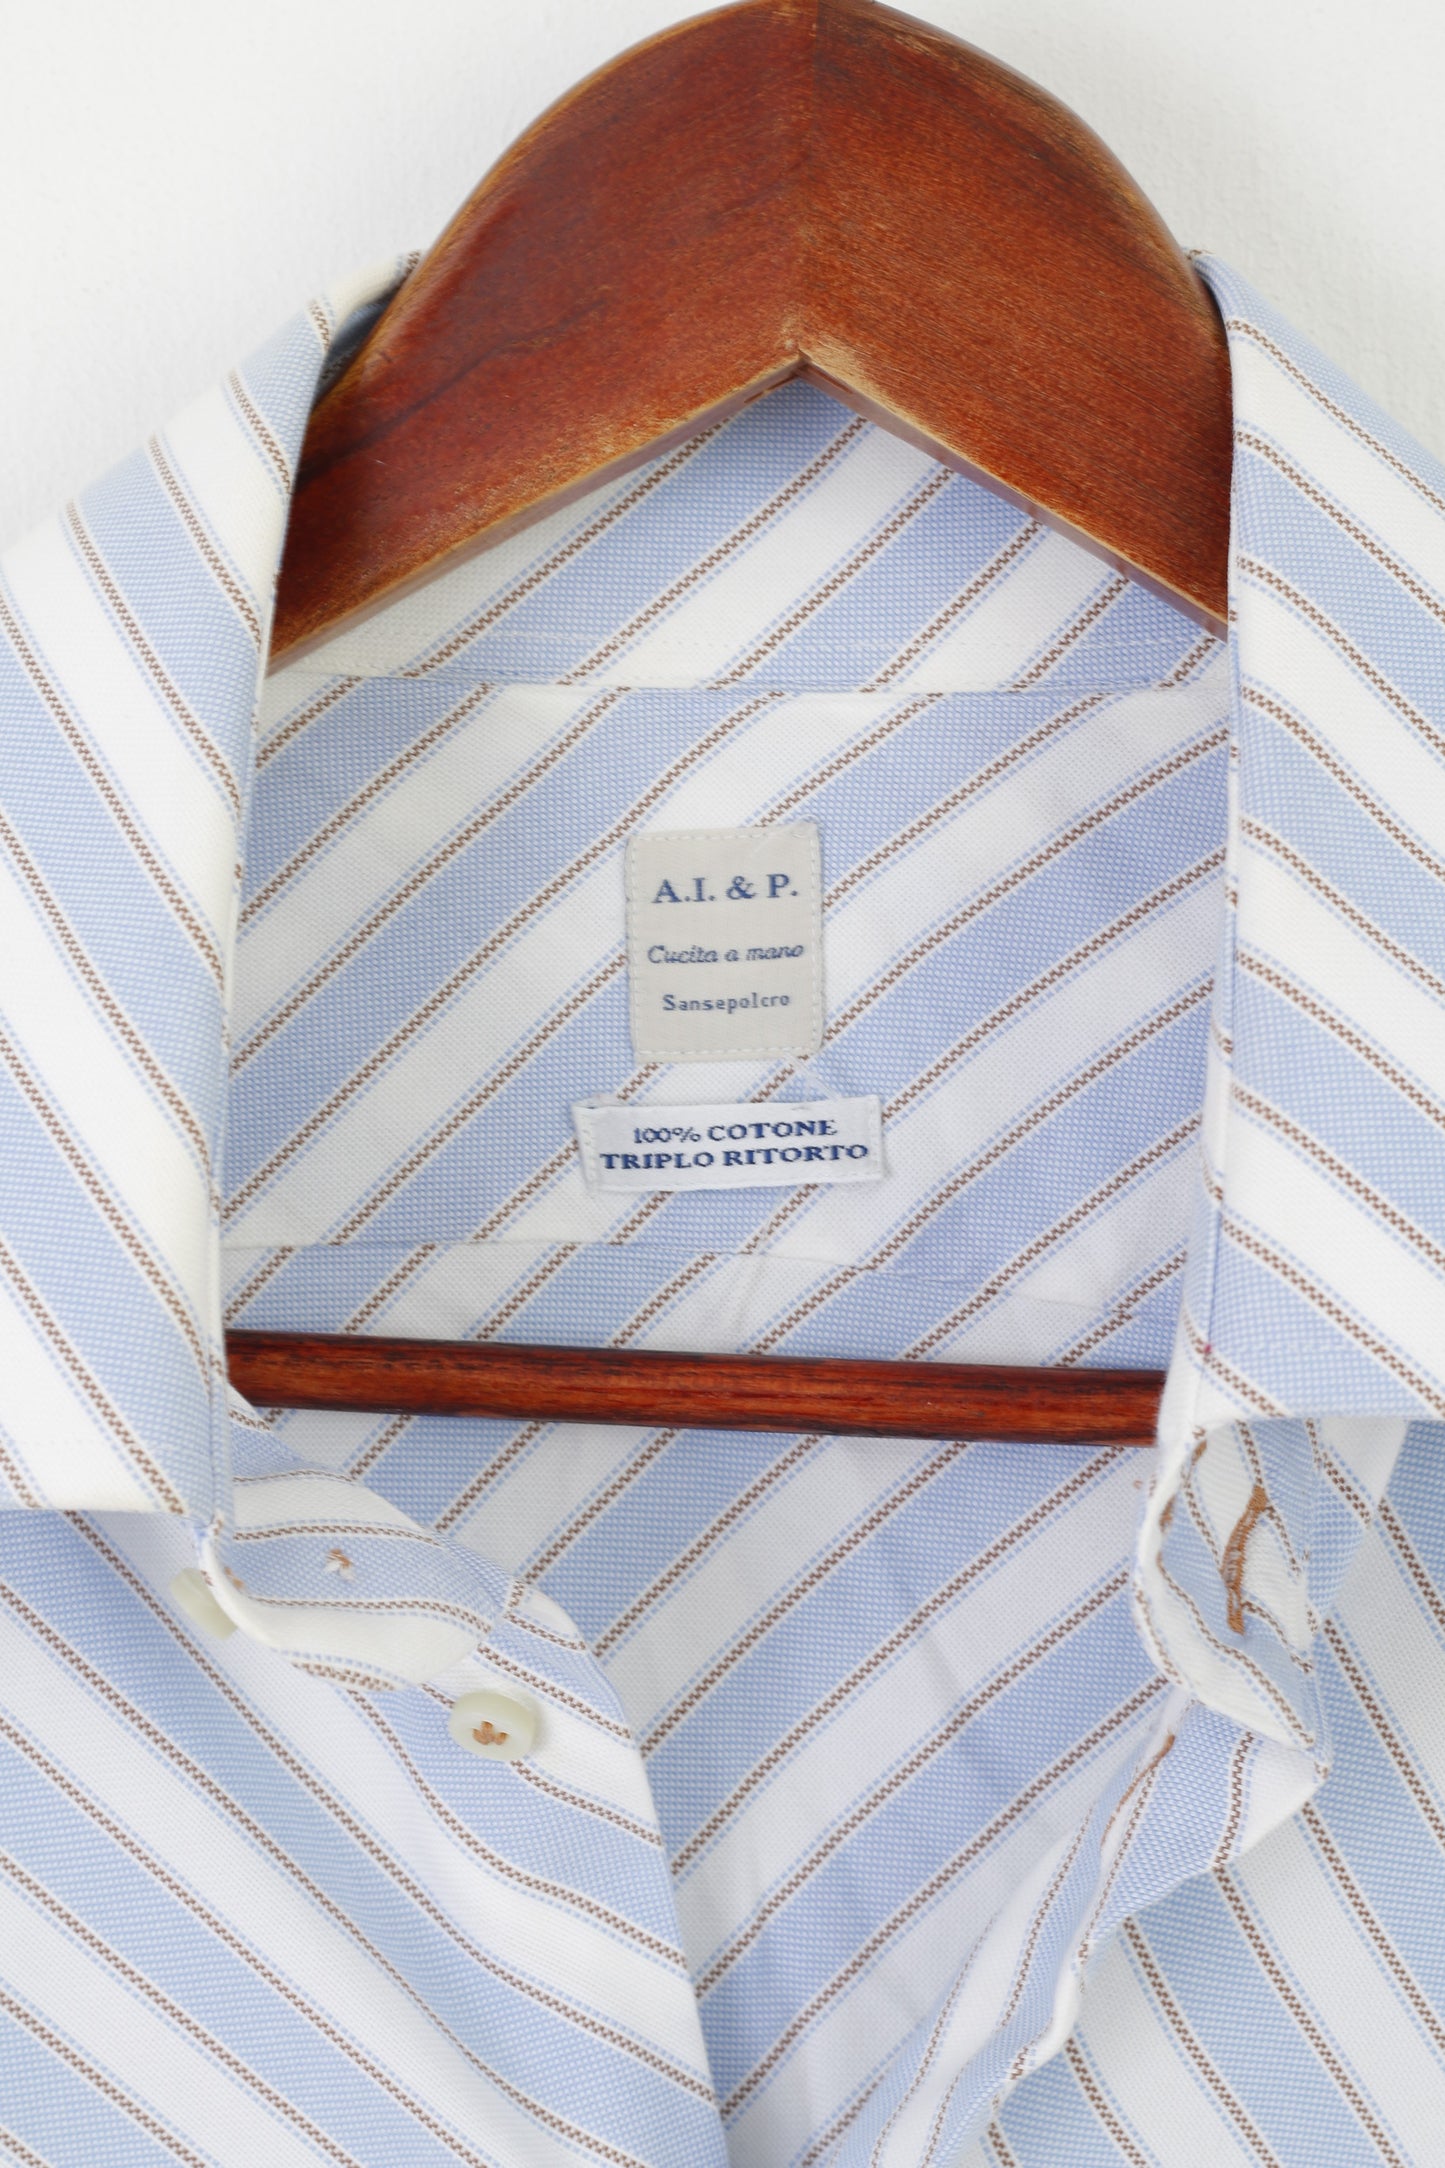 A.I. & P. Men 17 43 M Casual Shirt Blue Striped Cotton Sansepolcro Made in Italy Top